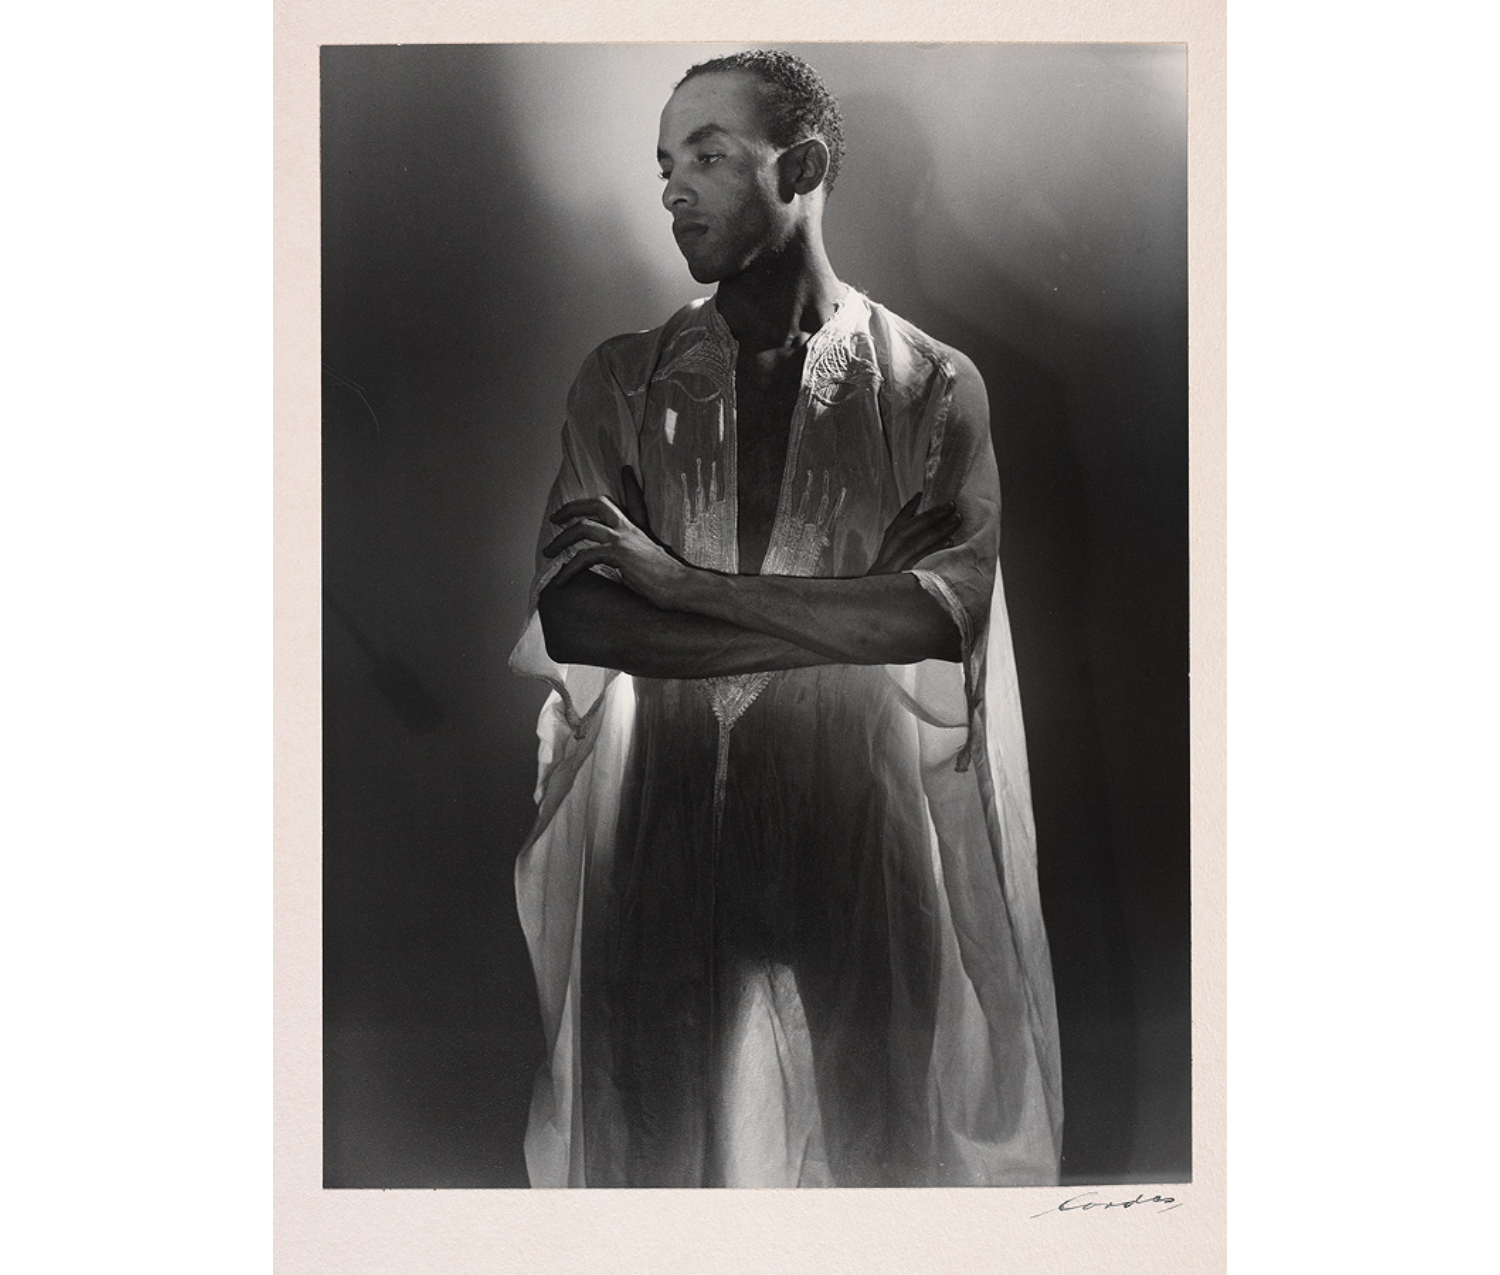 Three-quarter portrait of a Black man in a translucent gown. The lighting is dramatic; his arms are crossed and he looks to the bottom left corner of the portrait.